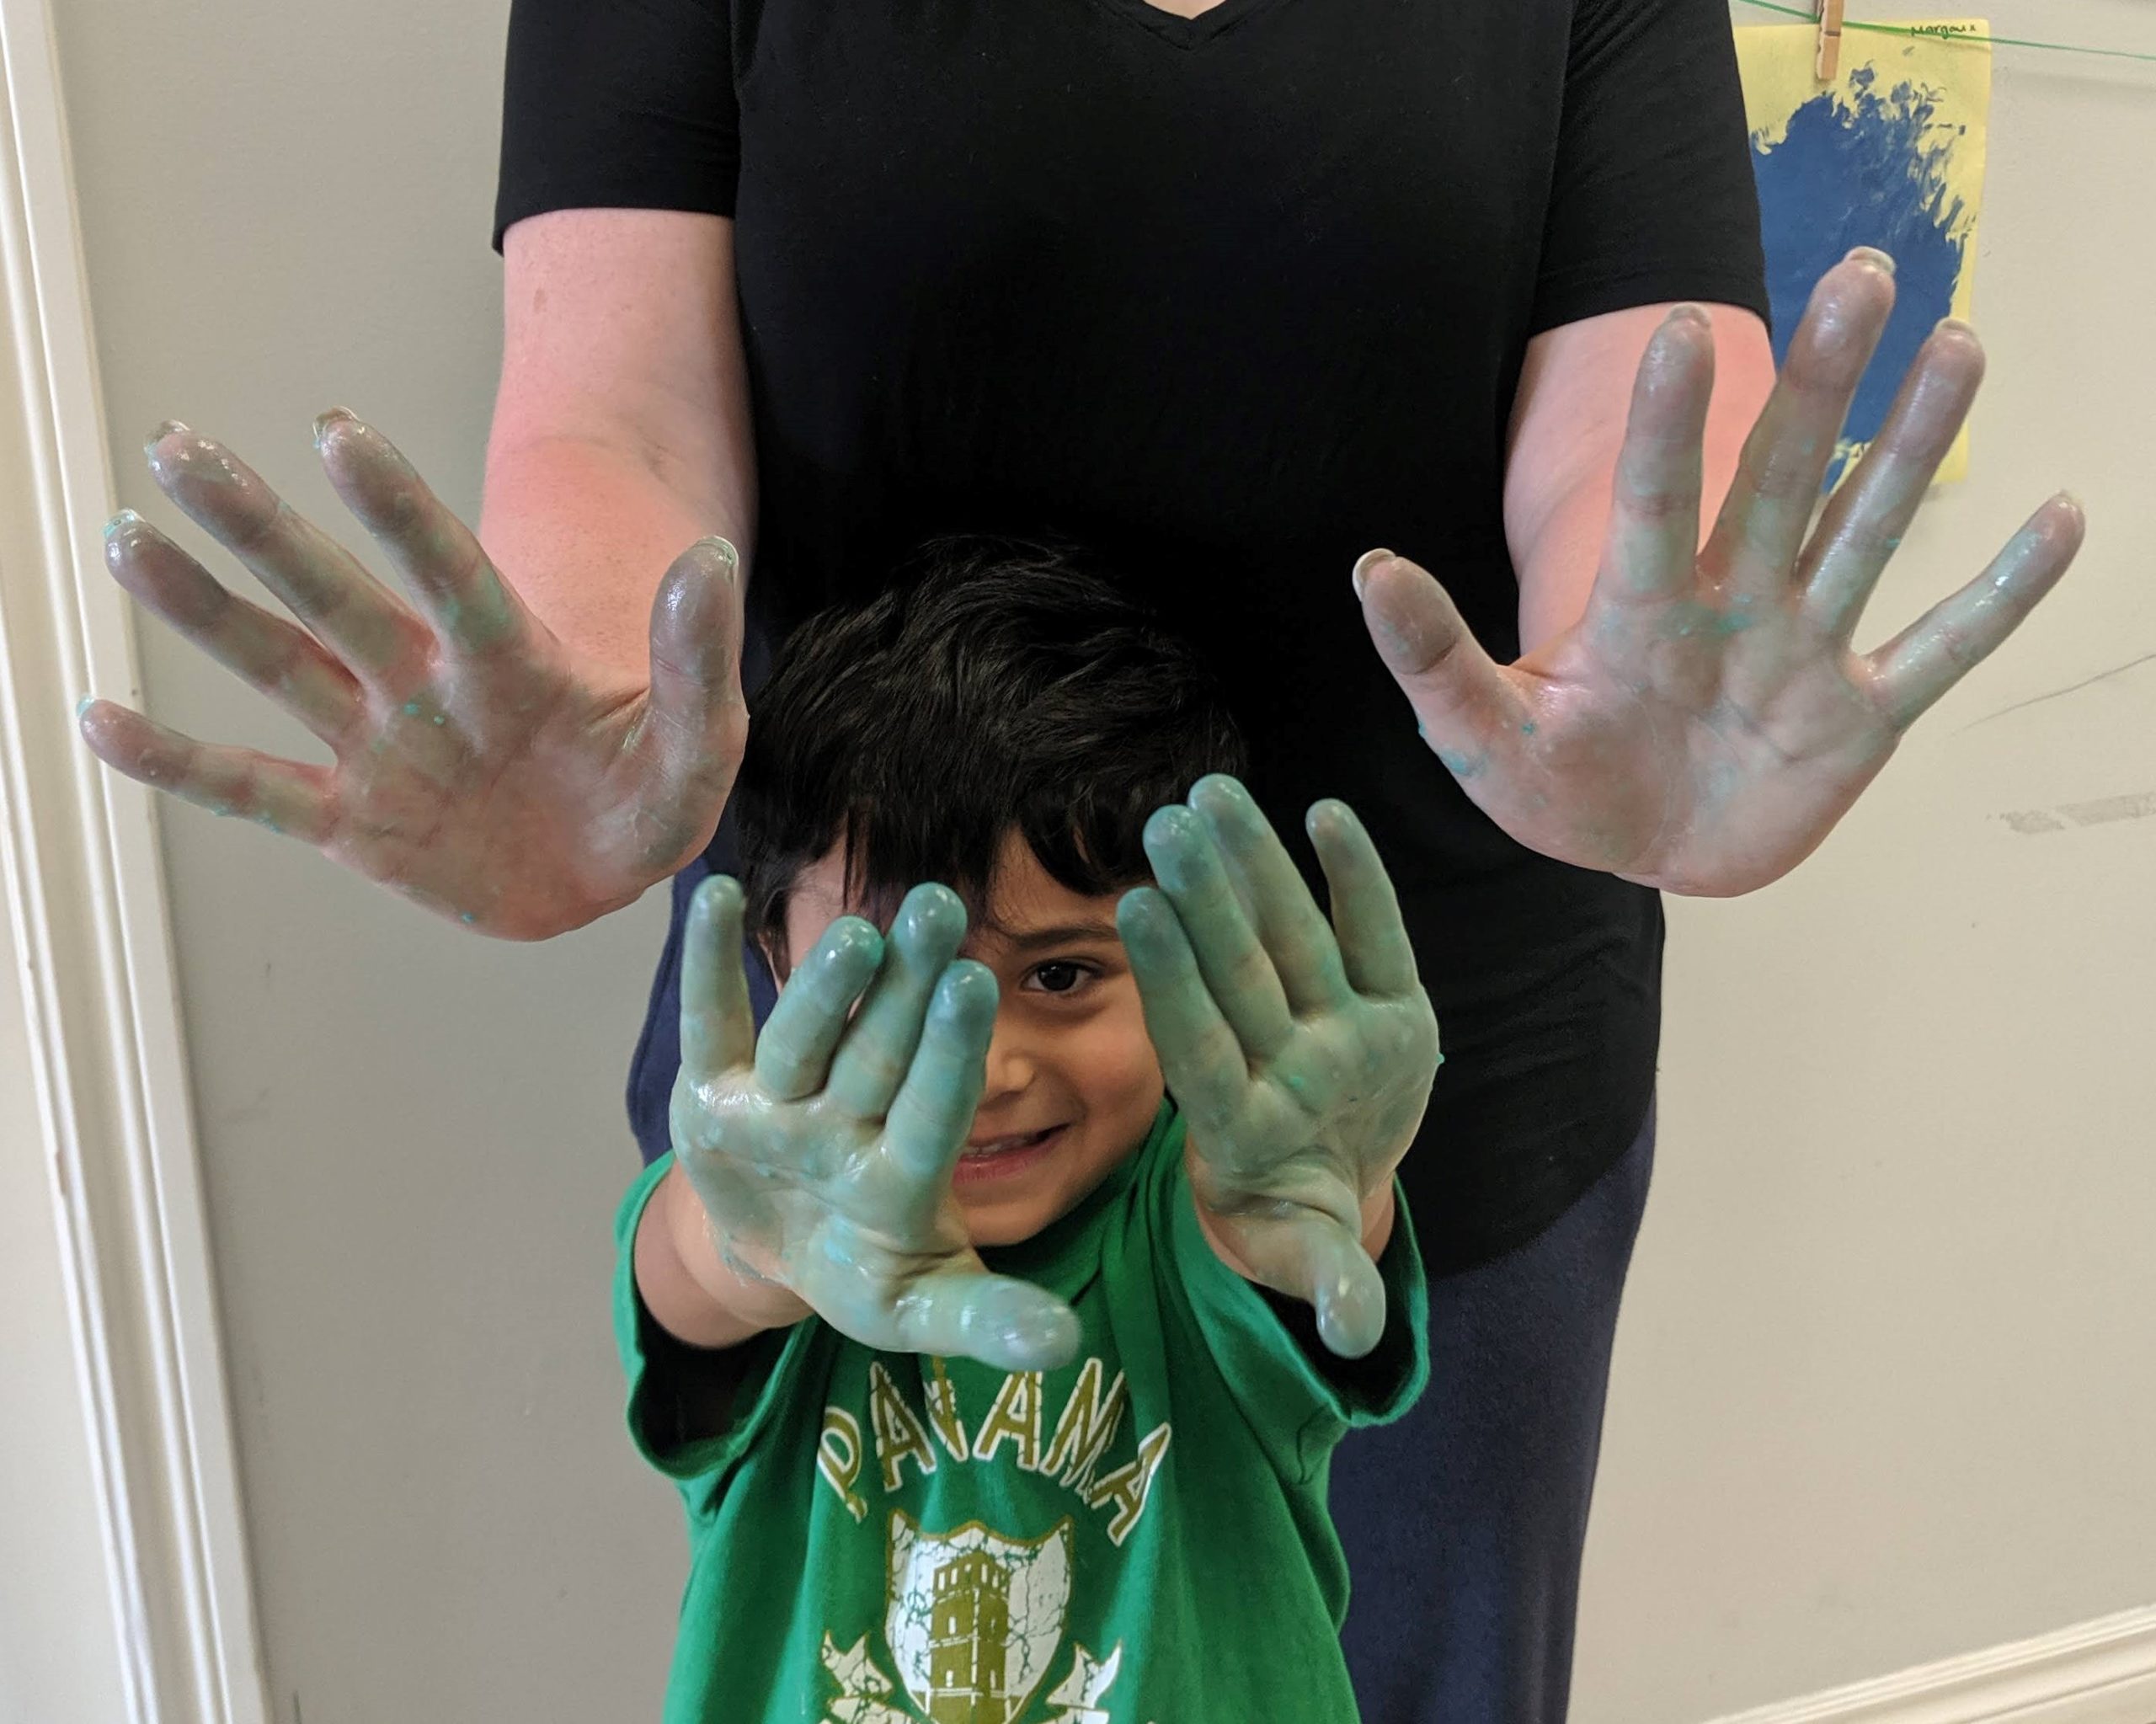 Learning About Germs on Little Hands